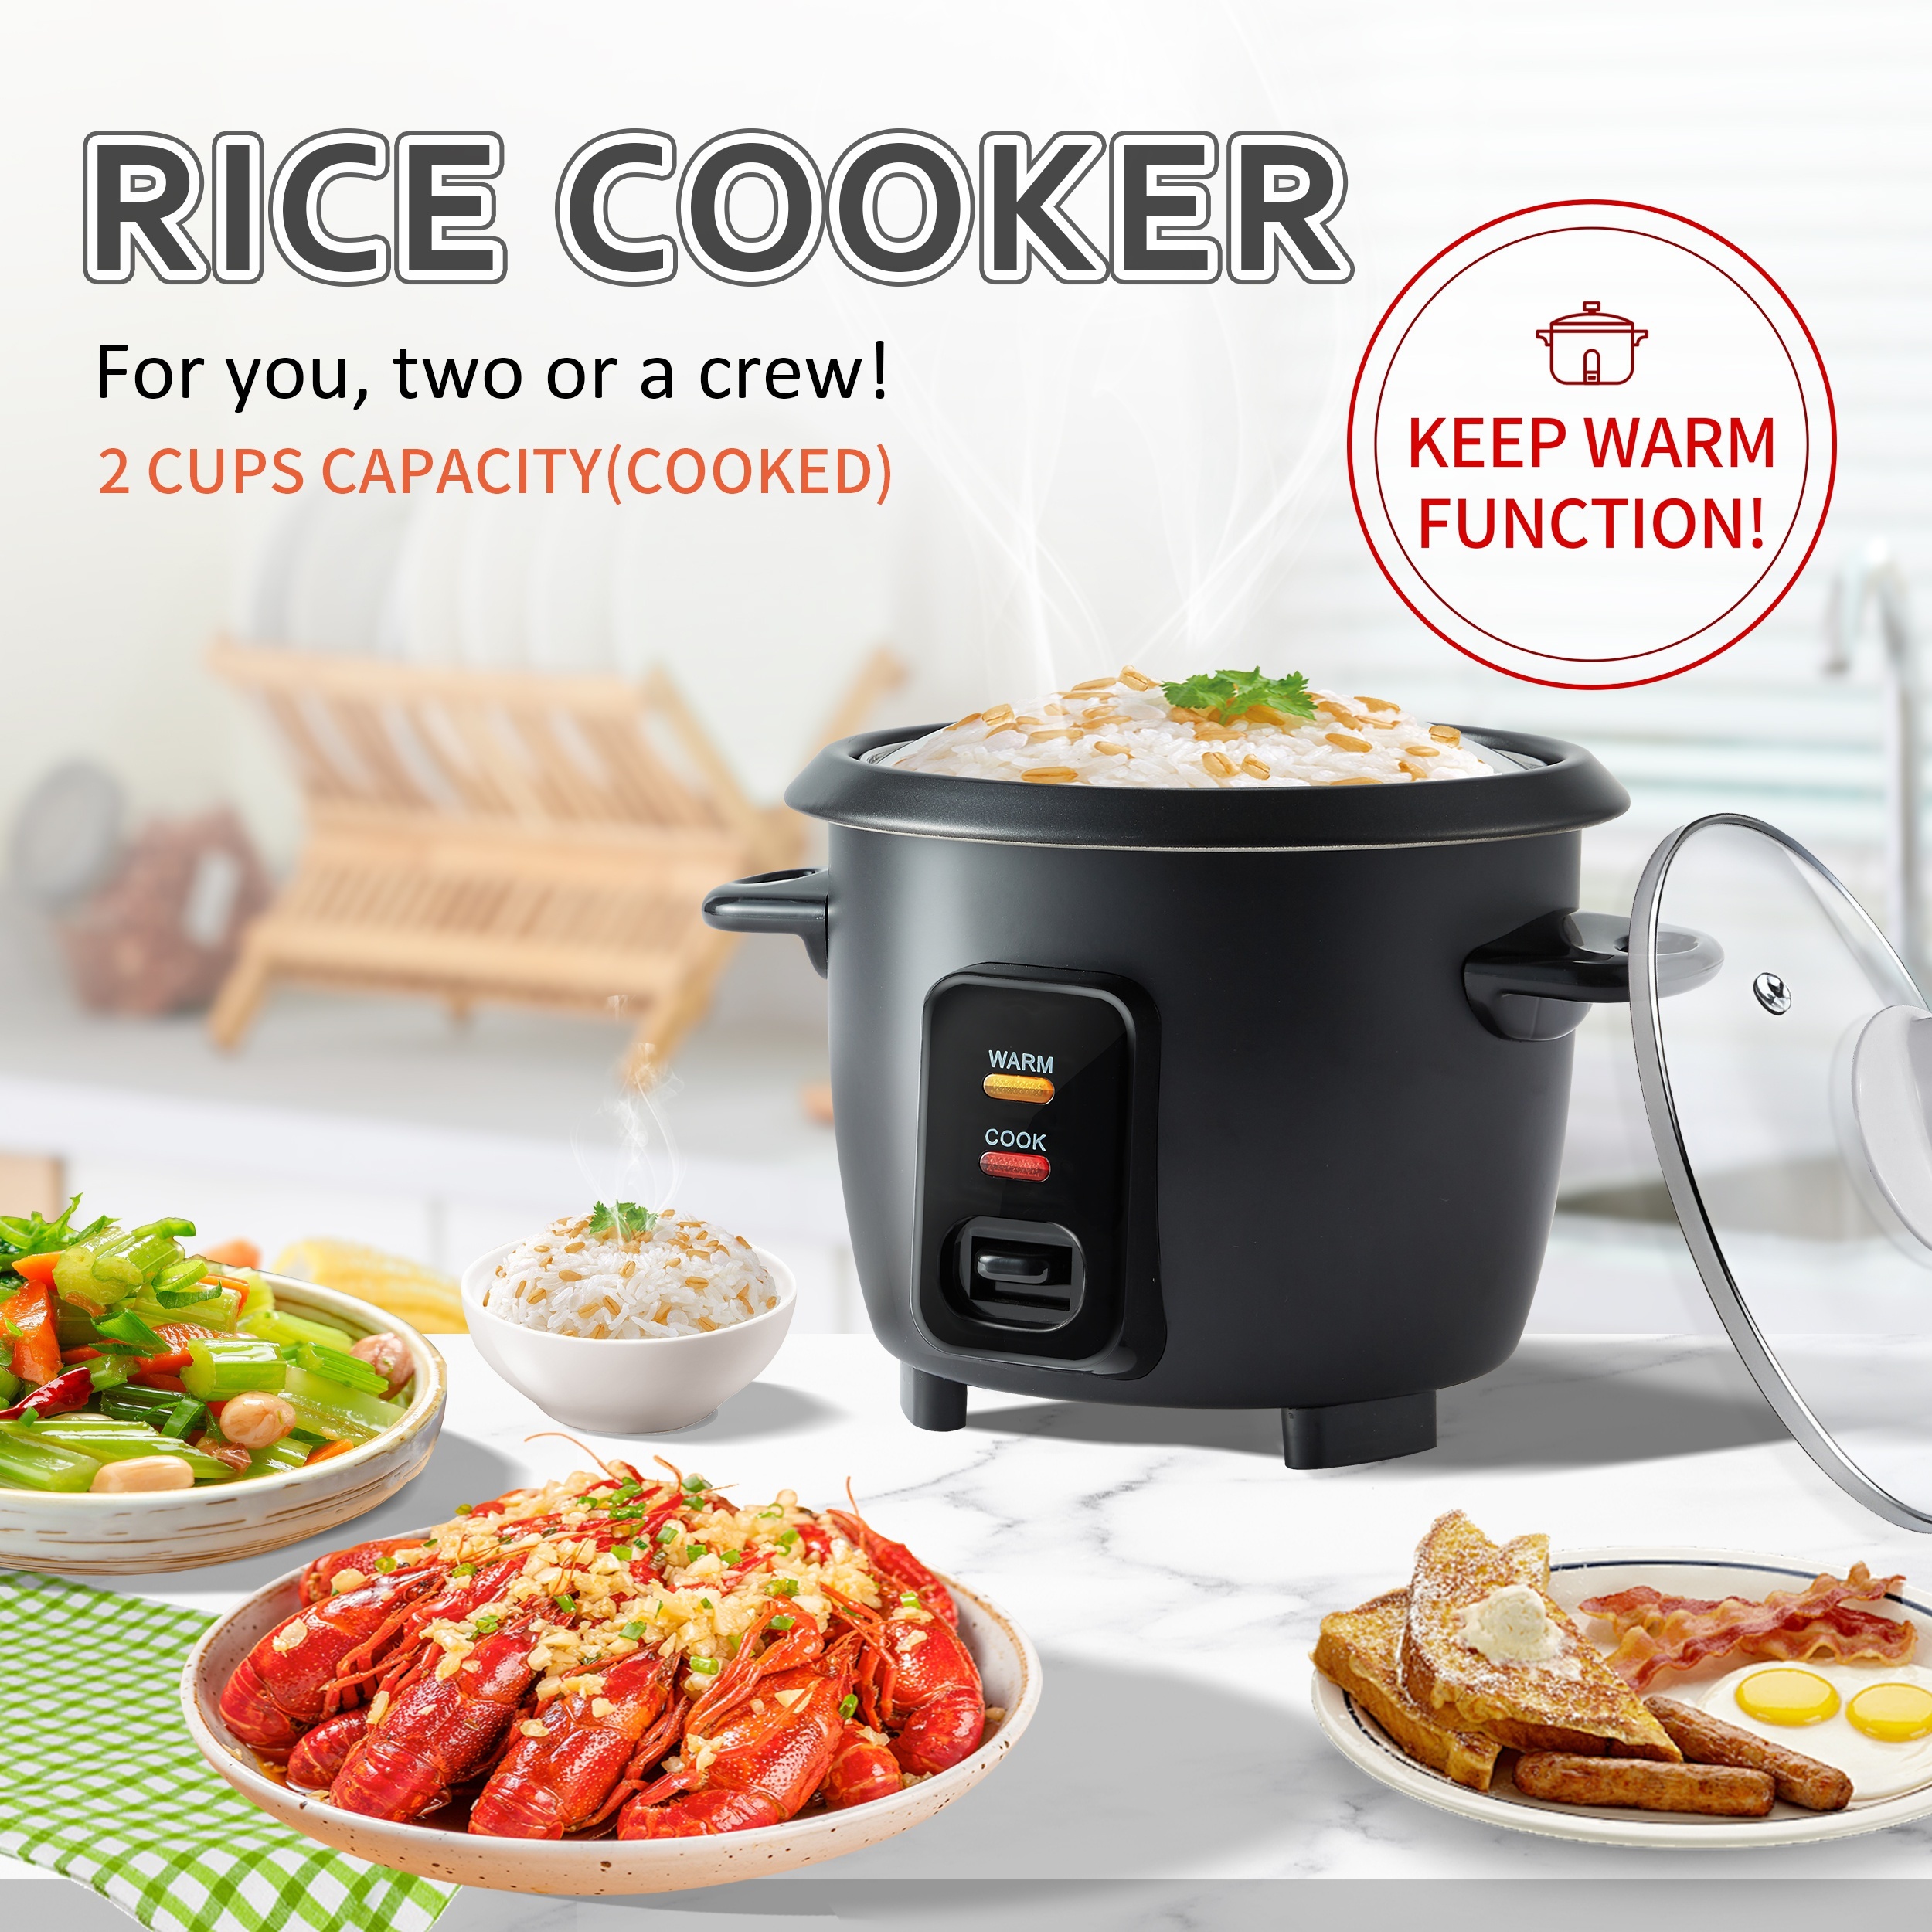 

Portable Rice Cooker Small Food Steamer, Keep Warm, Mini Rice Cooker 2 Cups Uncooked & Steam Tray